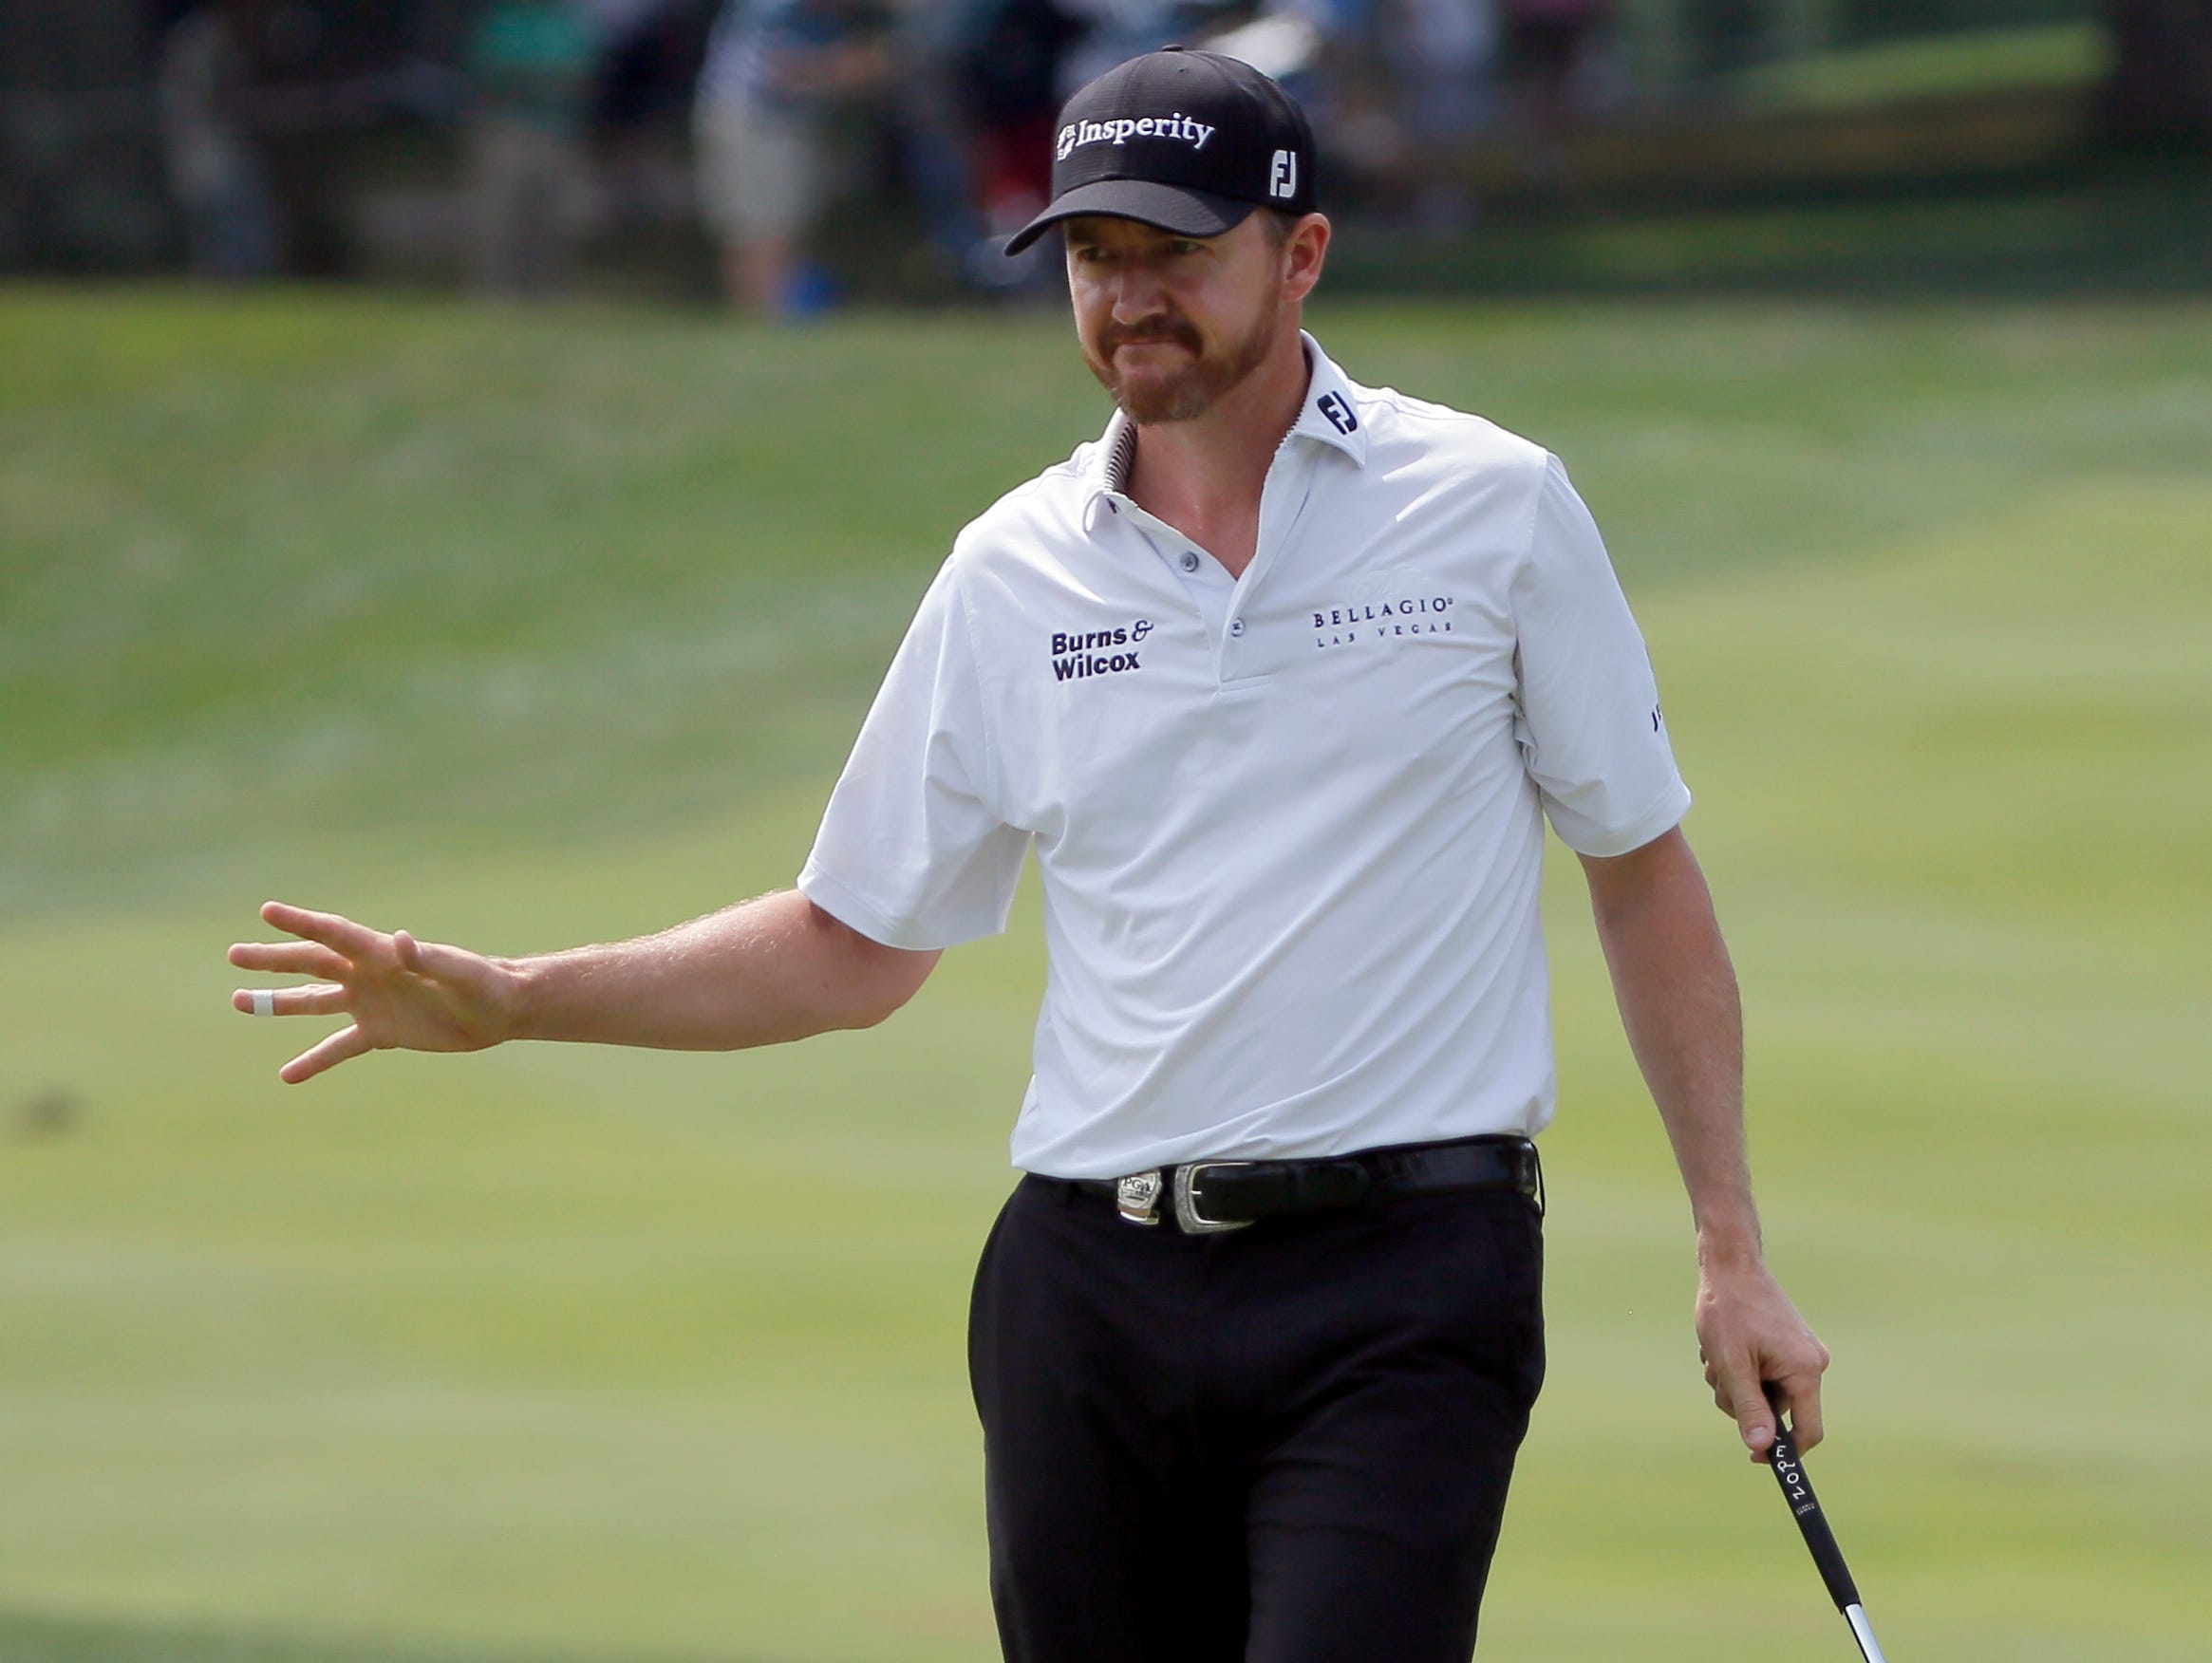 Jimmy Walker reacts to his putt on the third hole during the first round of the PGA Championship golf tournament at Baltusrol Golf Club in Springfield, N.J.